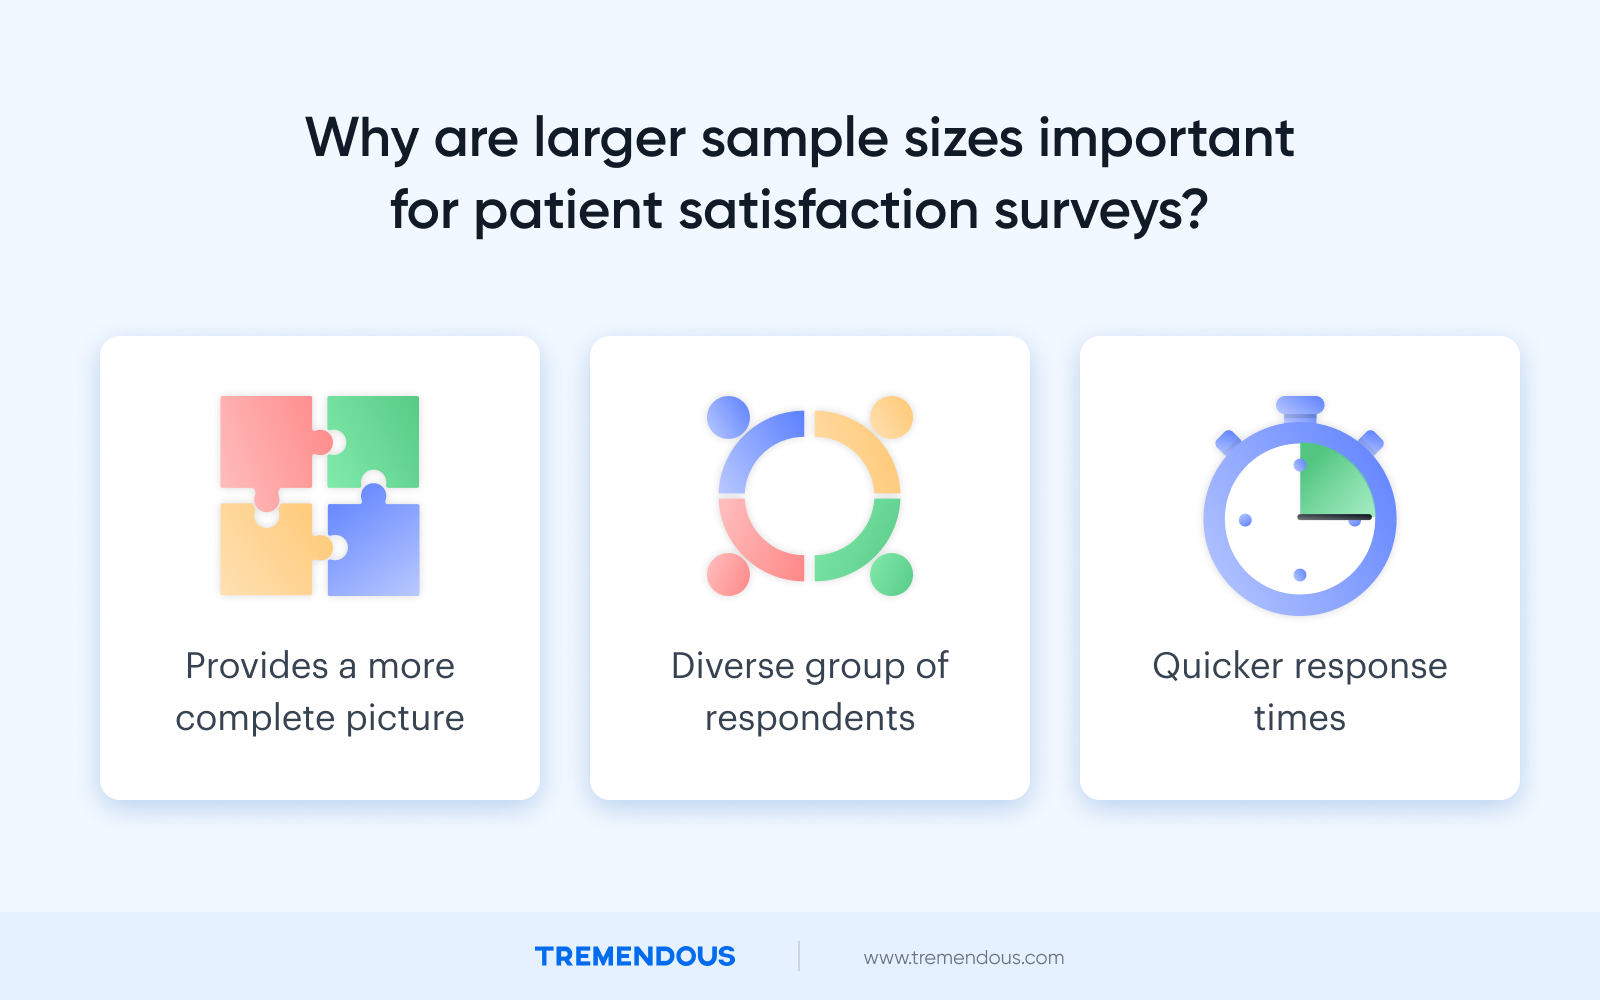 At the top, text reads: "Why are larger sample sizes important for patient satisfaction surveys?" Below are three boxes. One says "Provides a more complete picture." One says "Diverse group of respondents." One says "Quicker response times."